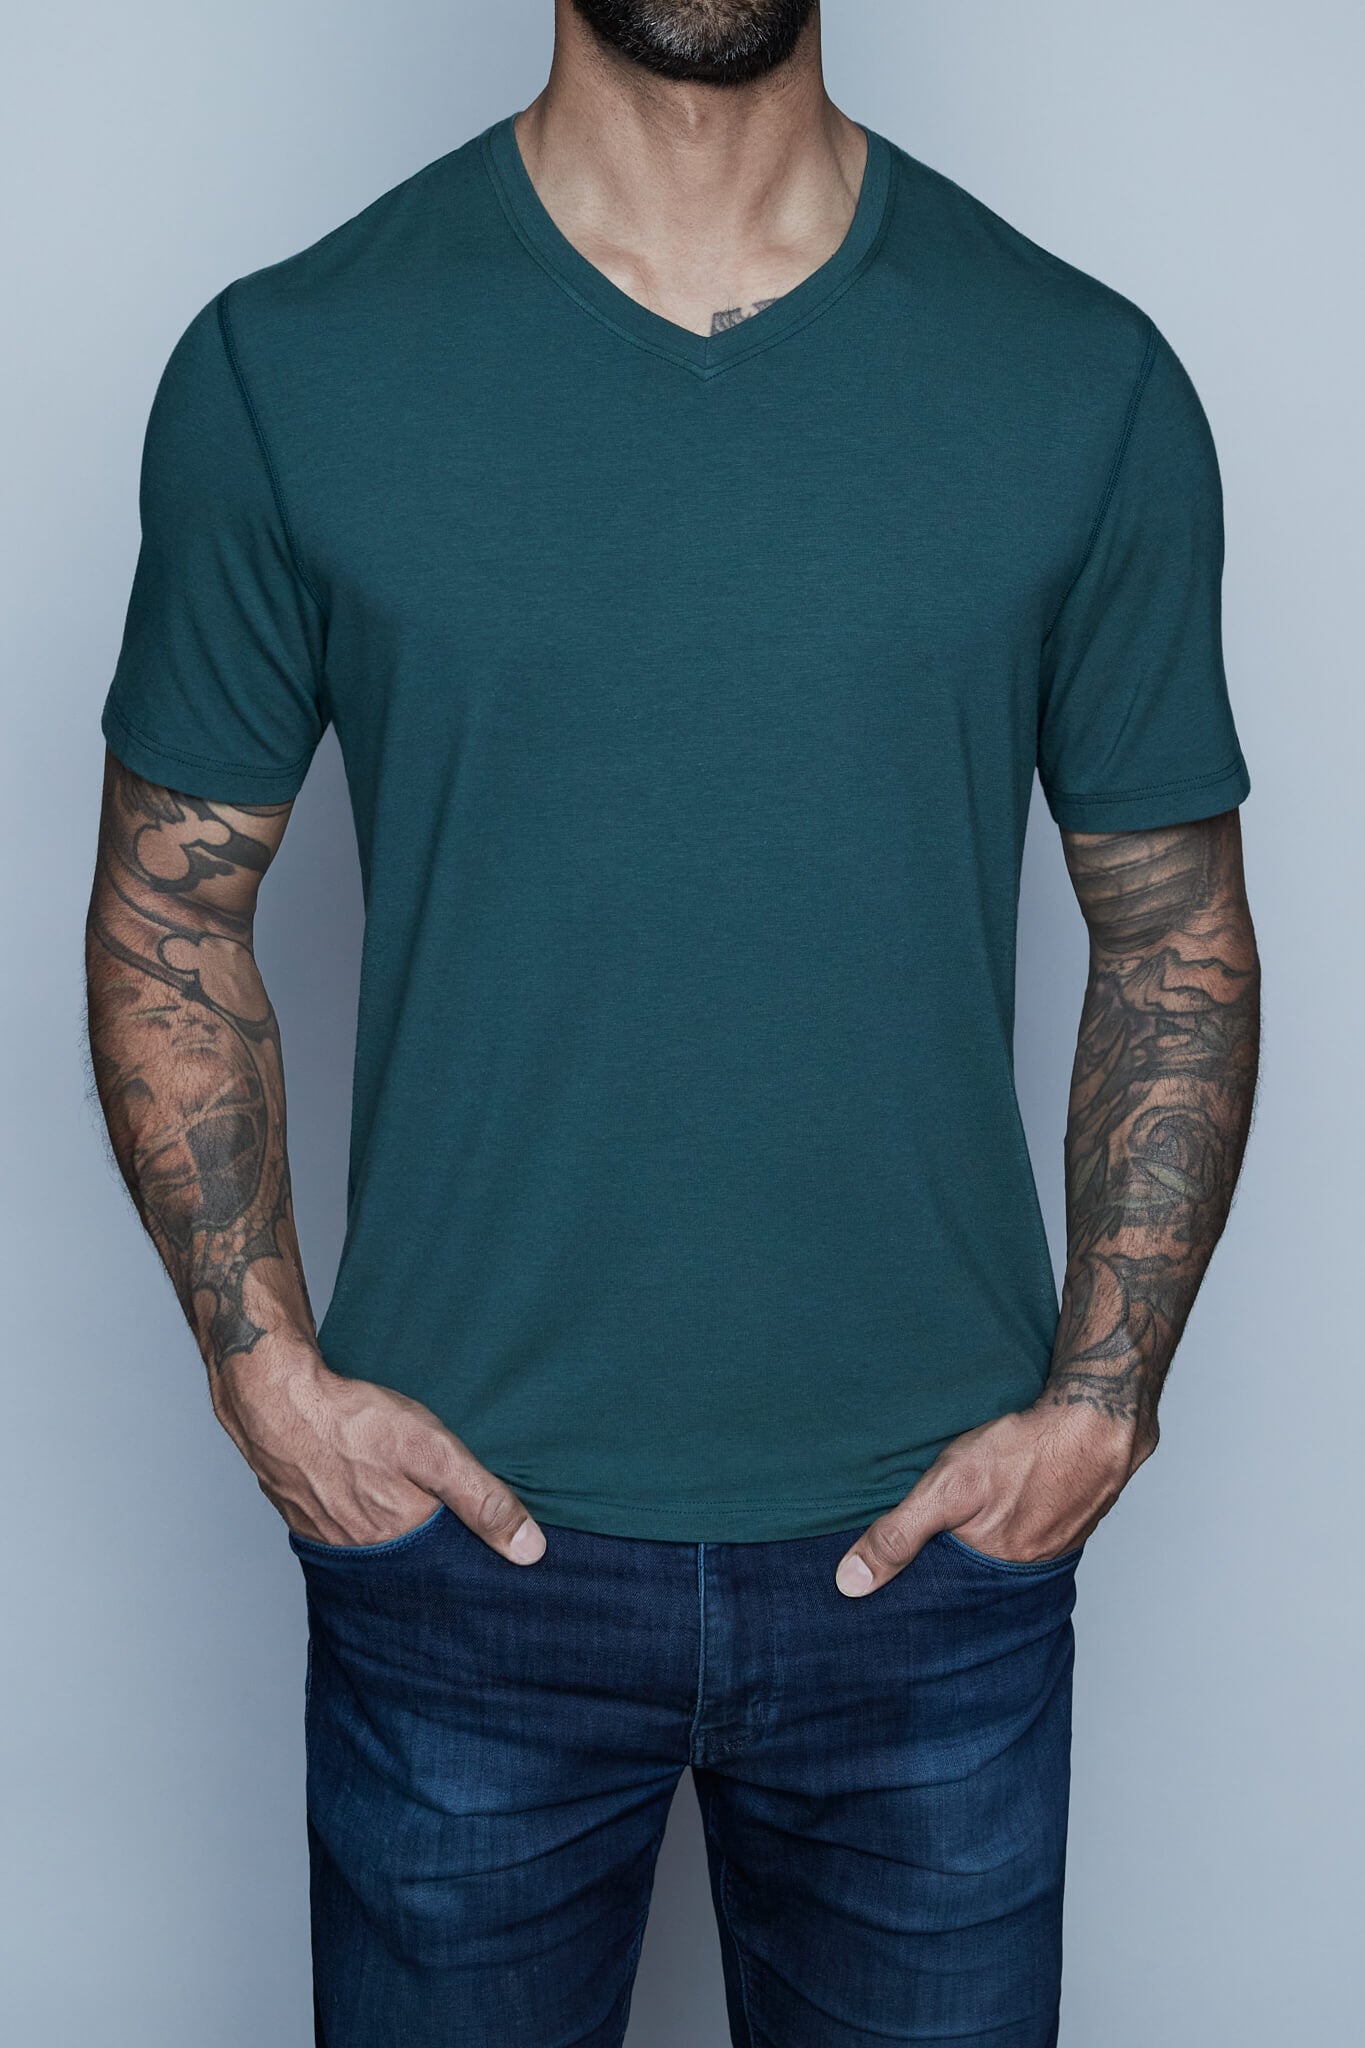 tall v-neck t-shirts in green for tall mens by Navas Lab Apparel